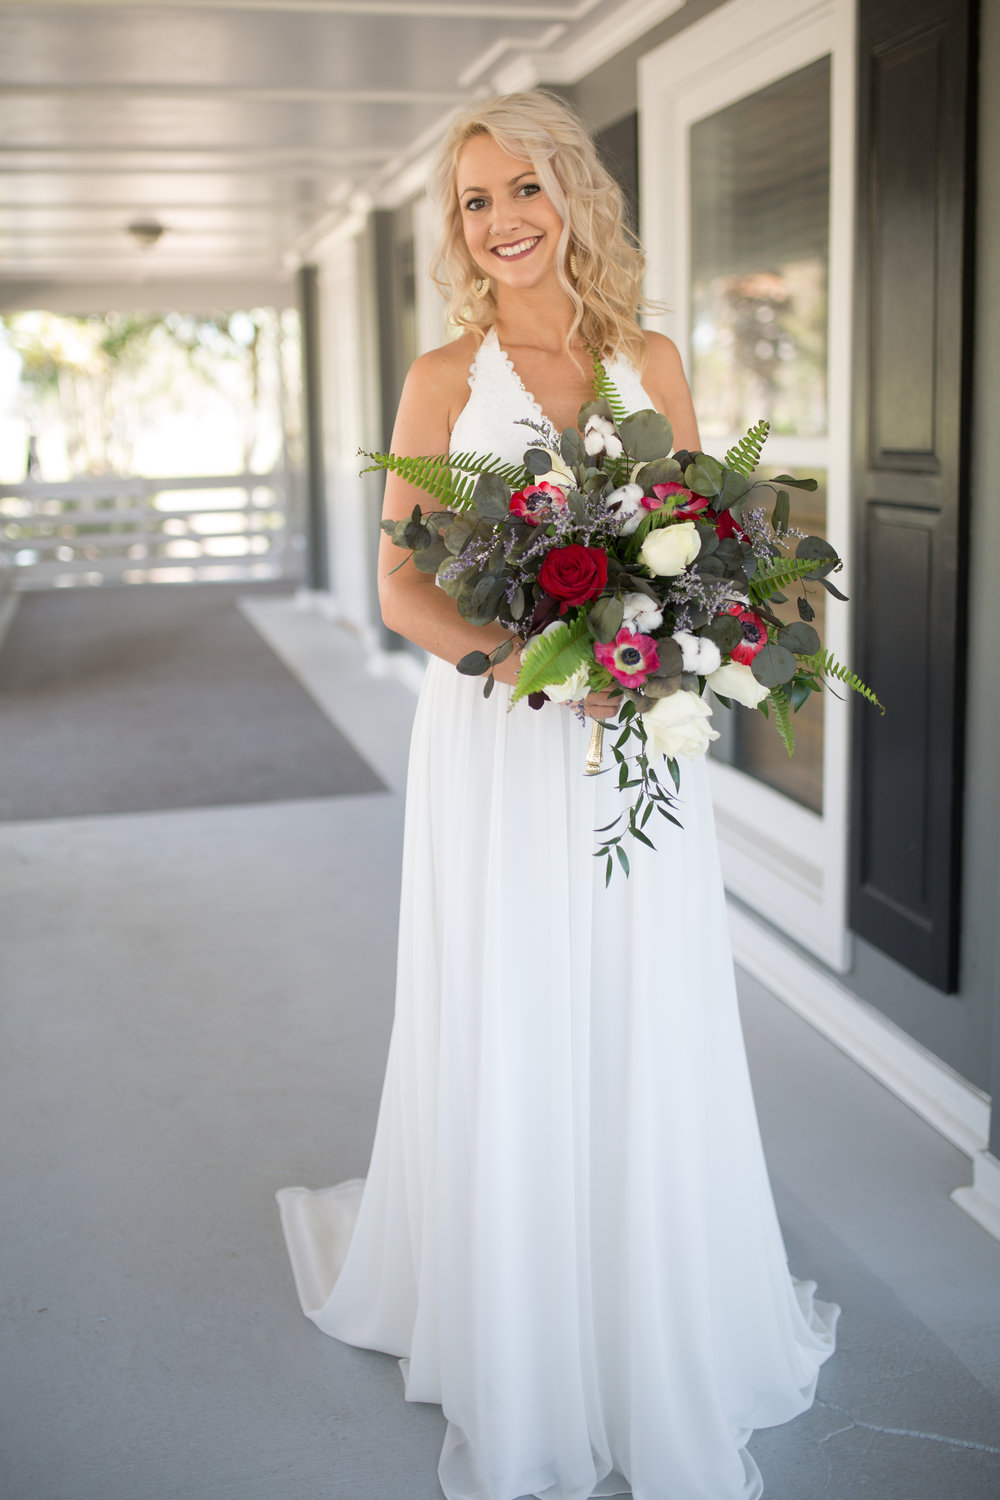 Smiling Bride with Flowers